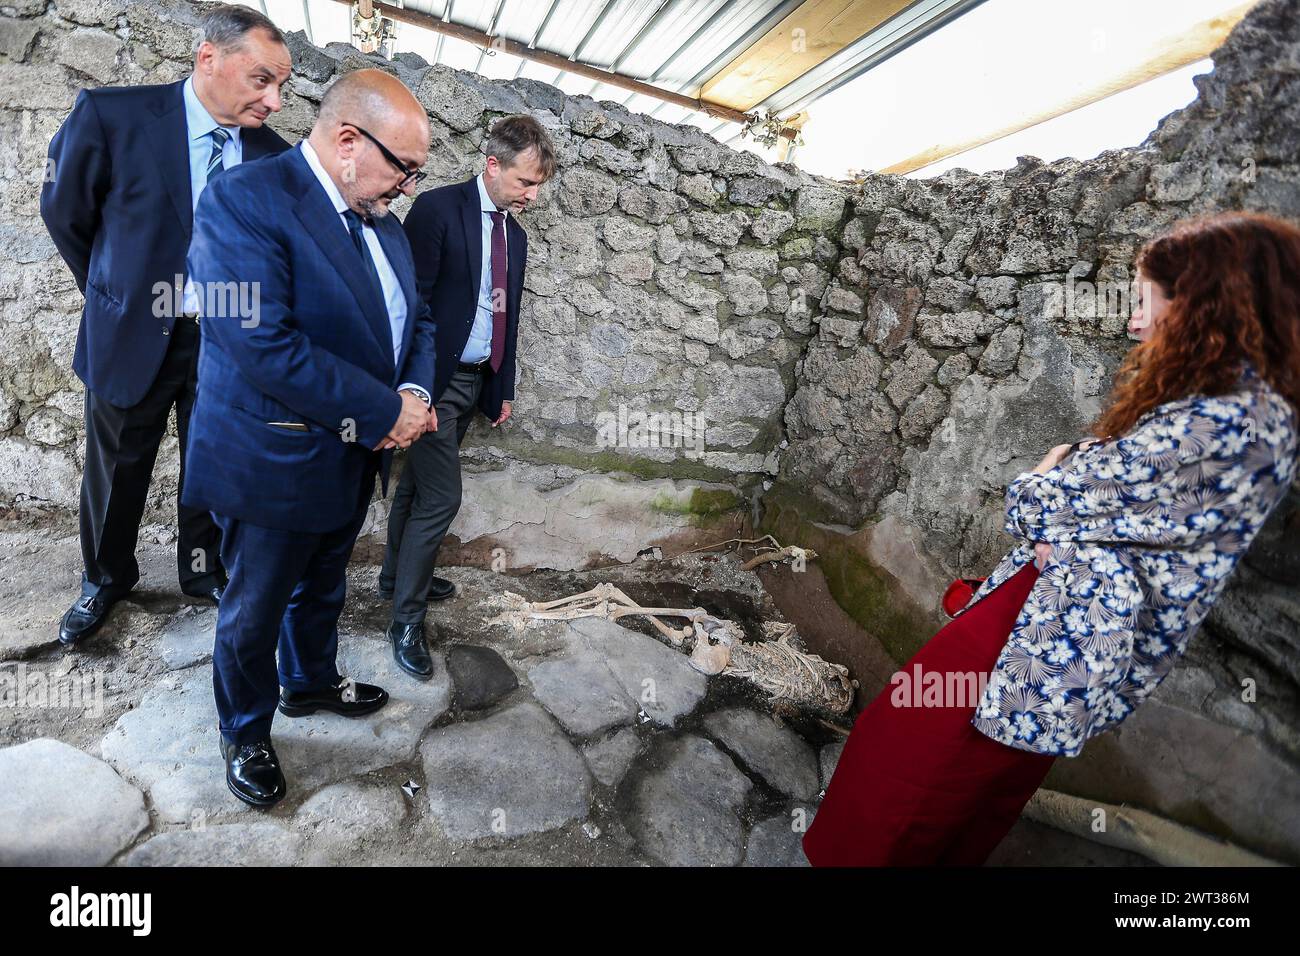 (EDITORS NOTE: Image depicts death.) The Minister of Cultural Heritage, Gennaro Sangiuliano (left-front) with the director of Pompeii excavations Gabr Stock Photo